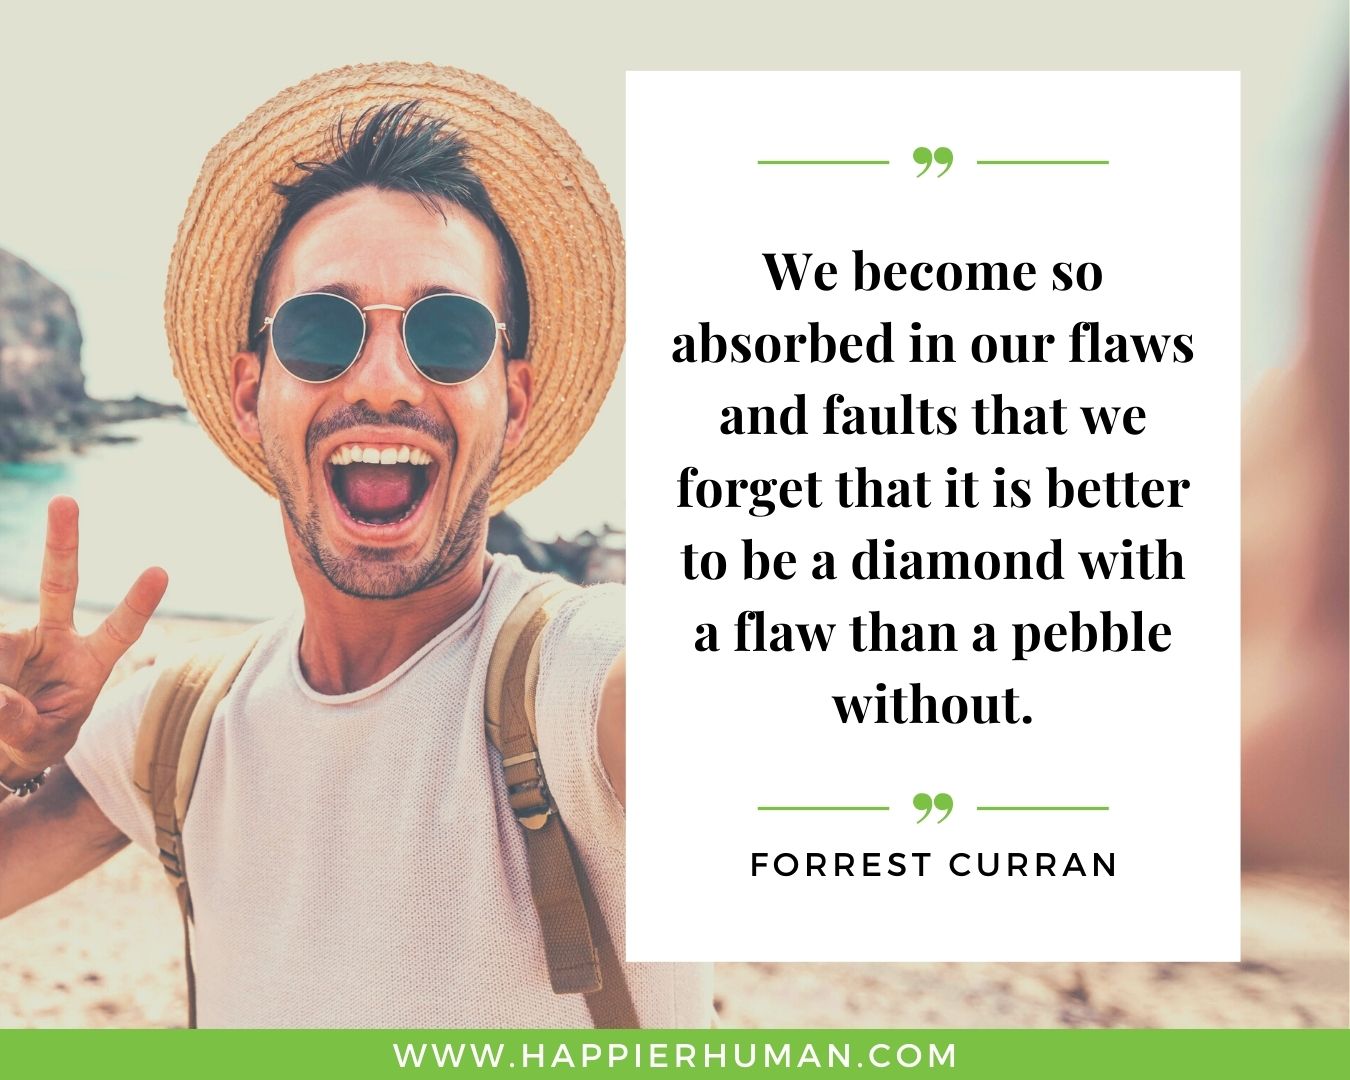 Positive Energy Quotes - “We become so absorbed in our flaws and faults that we forget that it is better to be a diamond with a flaw than a pebble without.” - Forrest Curran